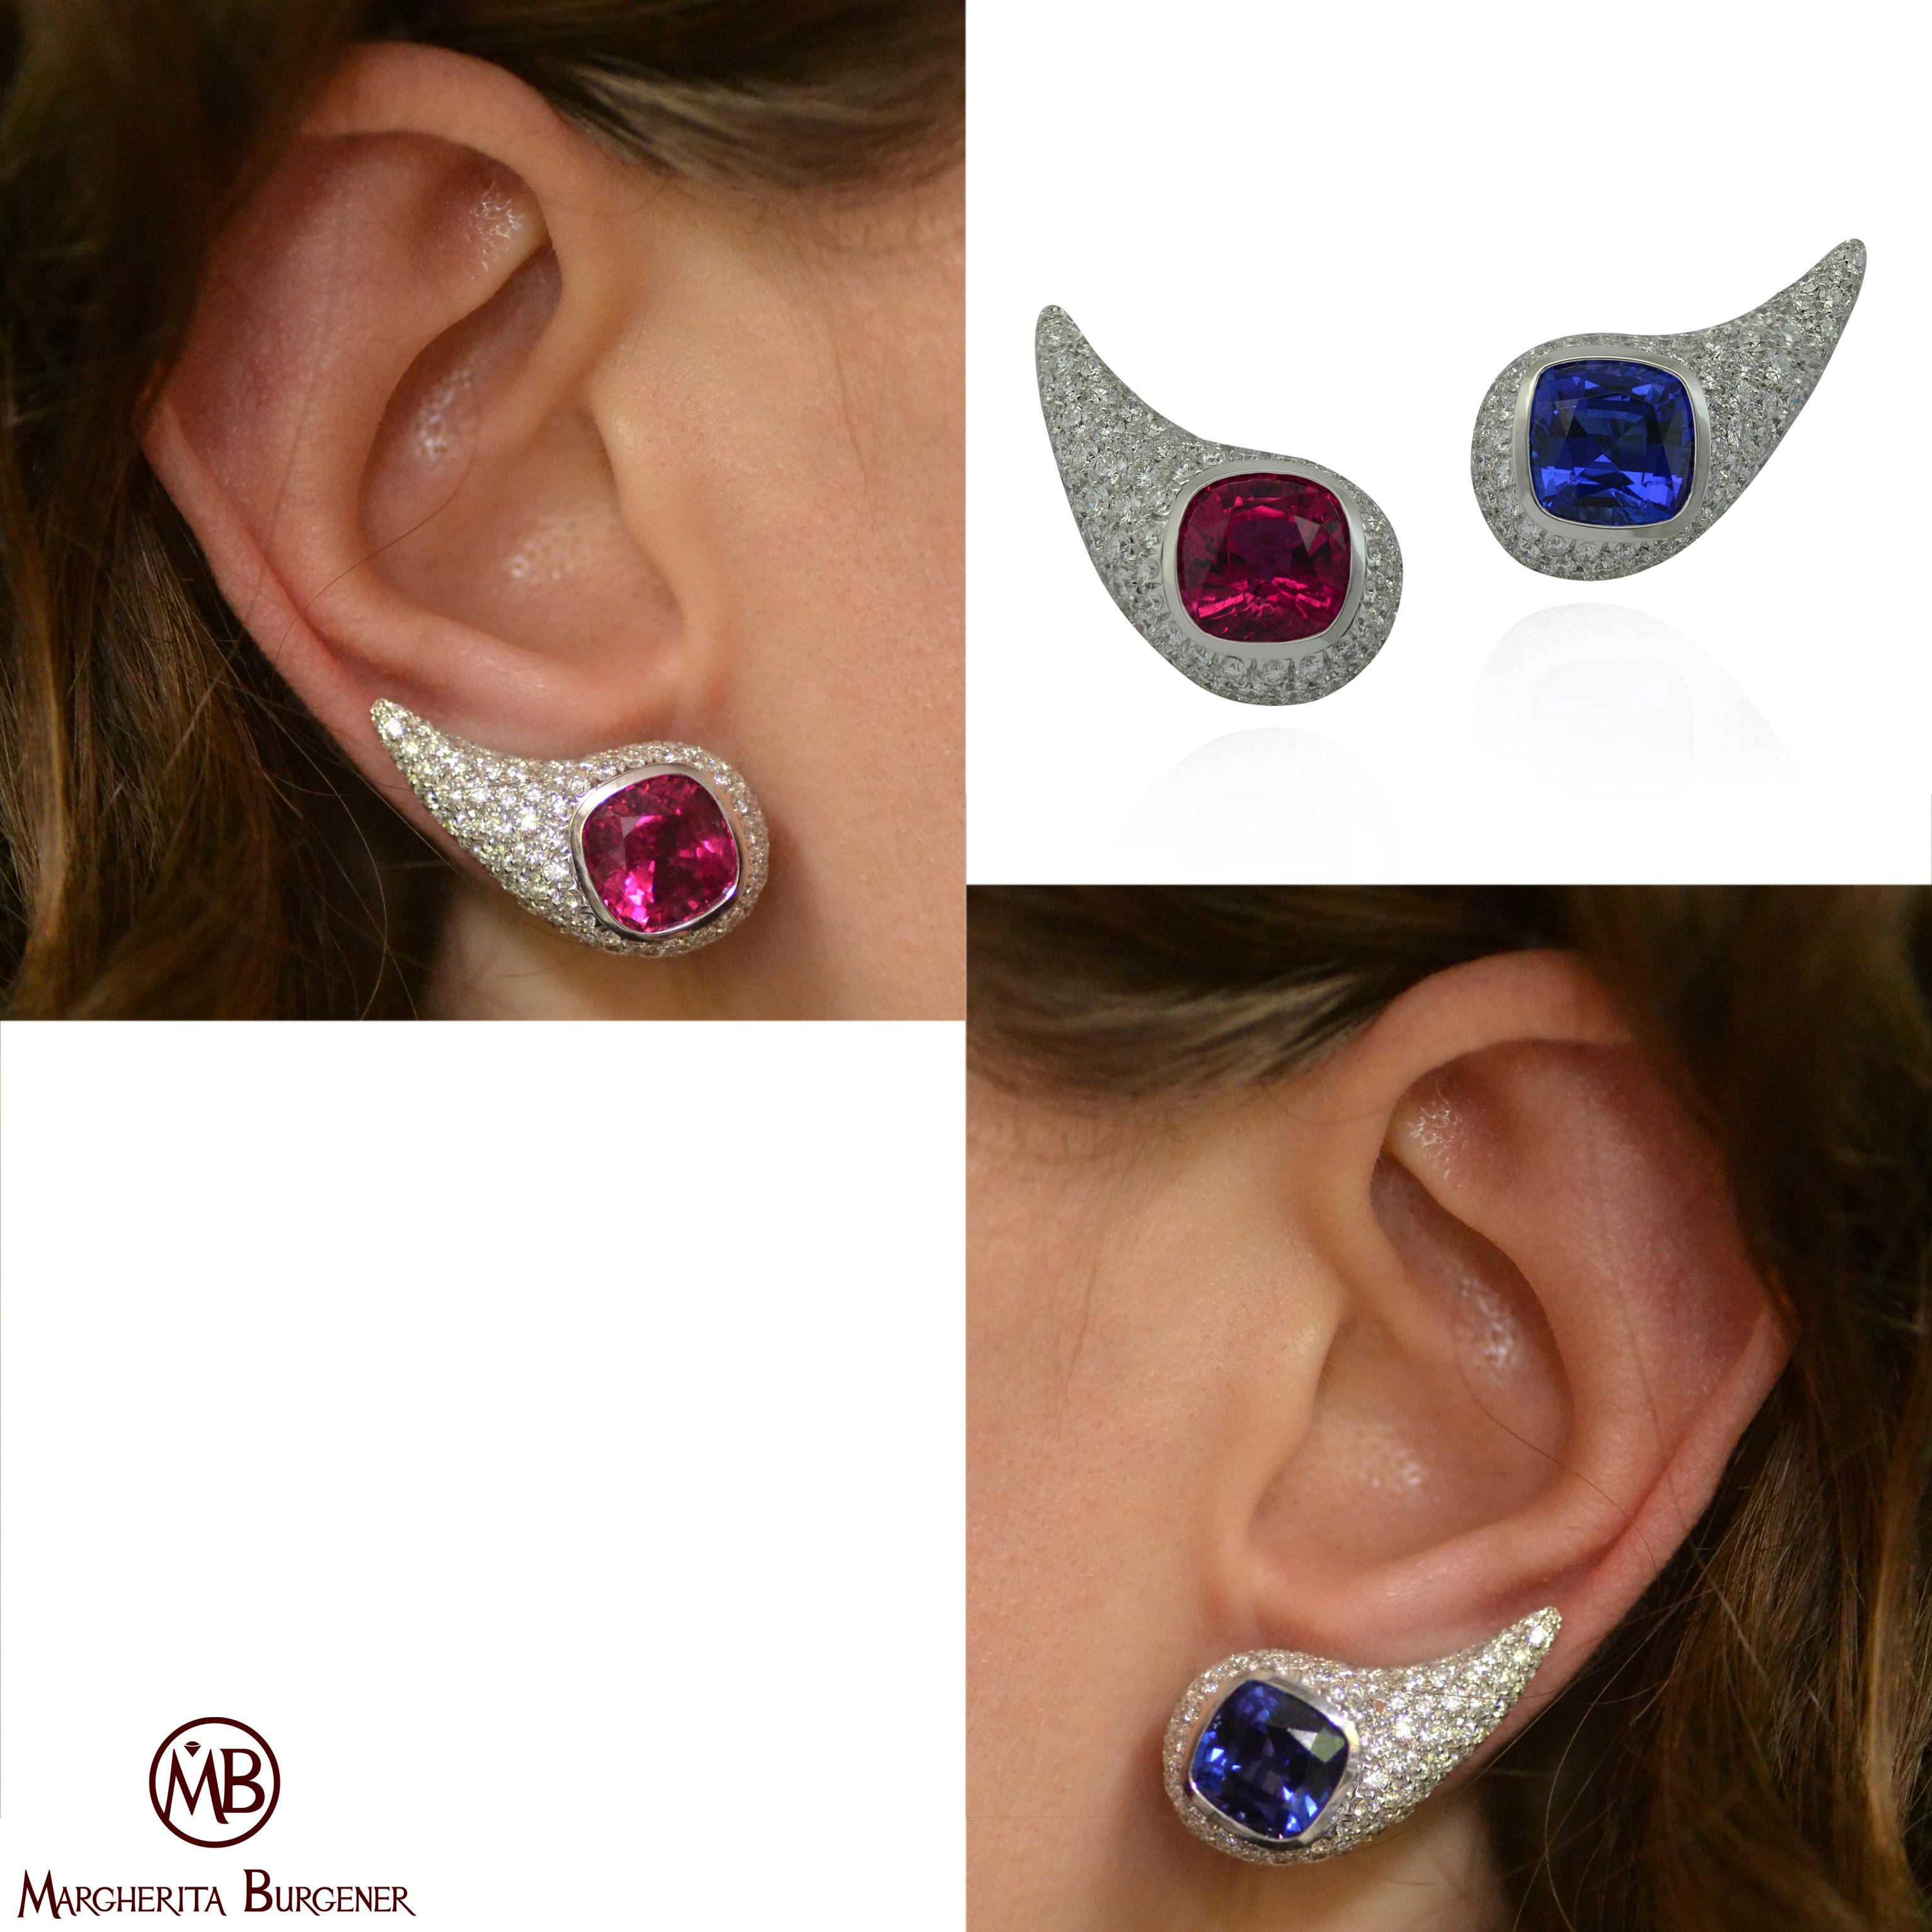 Handcrafted in Margherita Burgener family workshop, Italy, this unique mismatching  pair of earrings is fully pavé set with high quality diamonds.
They center two different main stones: a beautiful cushion cut rubellite tourmaline and a beautiful